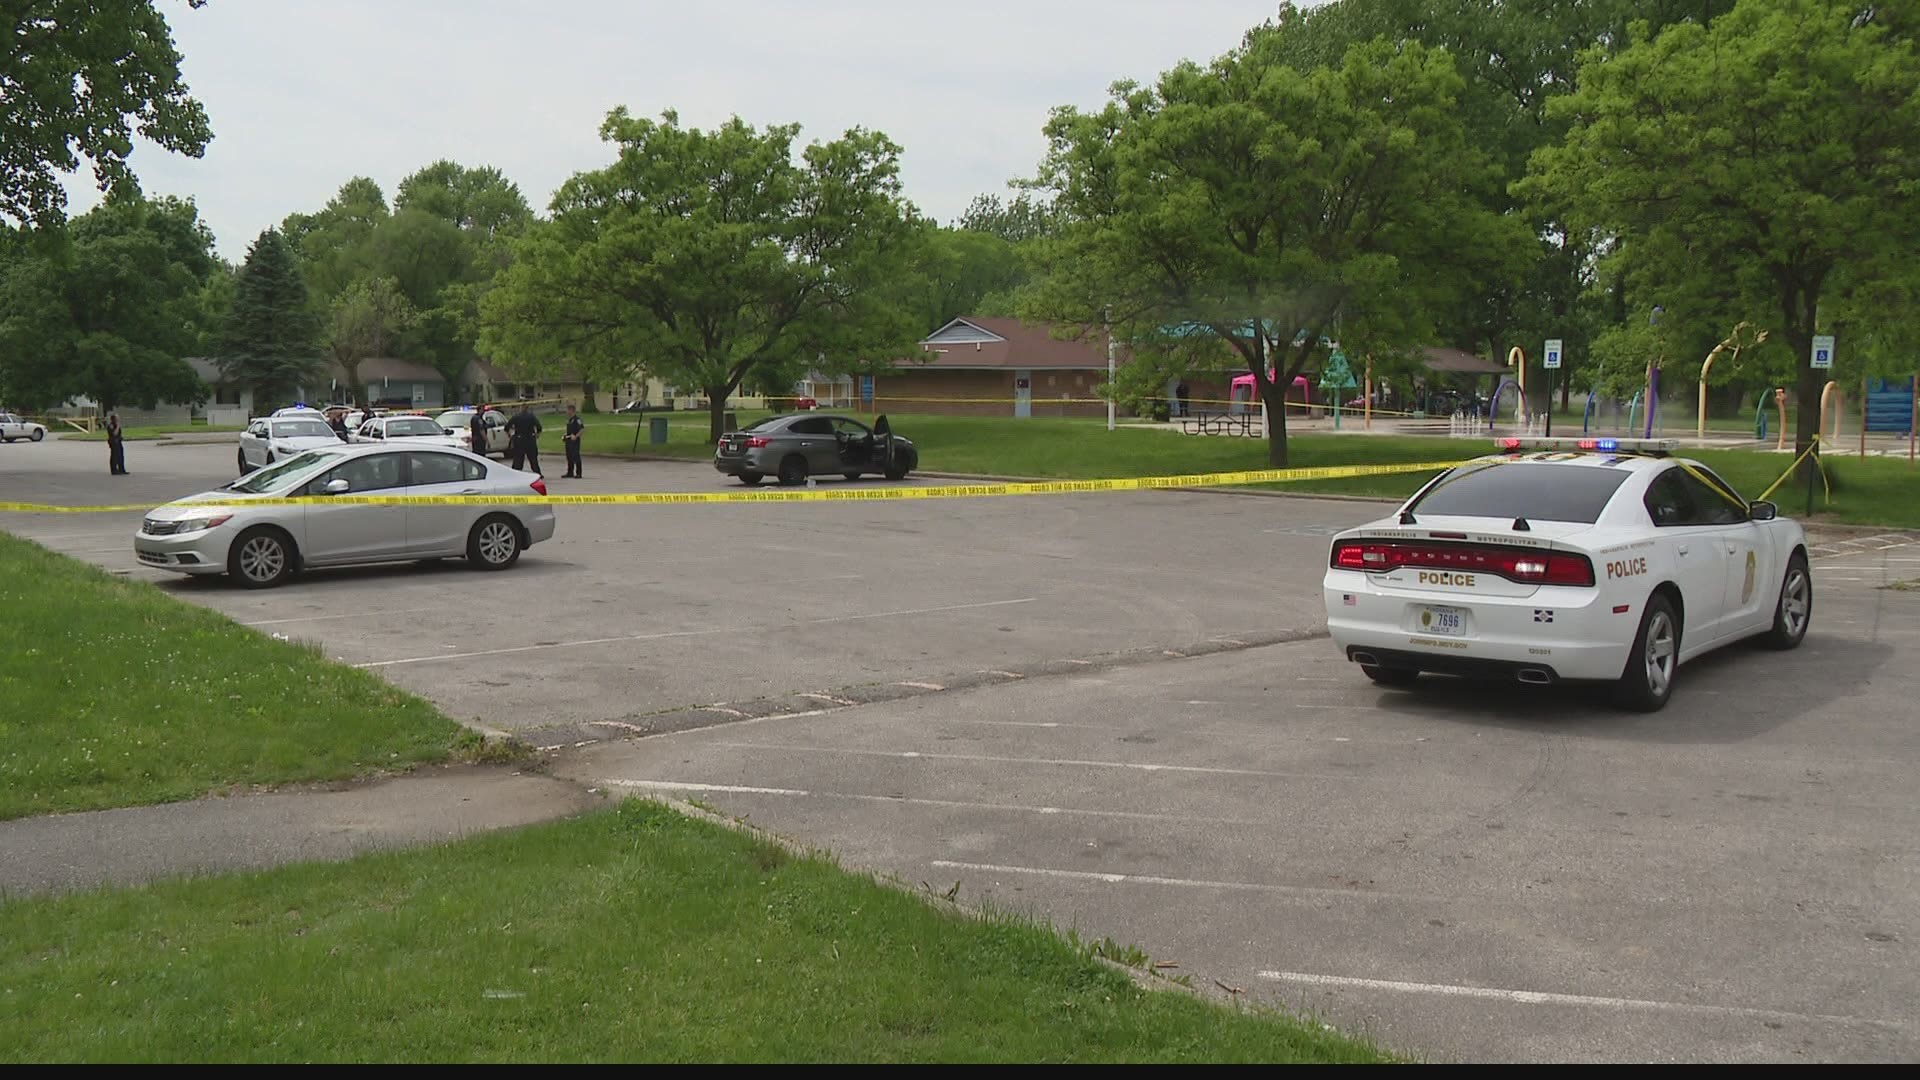 Police say the victim of the shooting was in "extremely critical" condition late Wednesday afternoon.